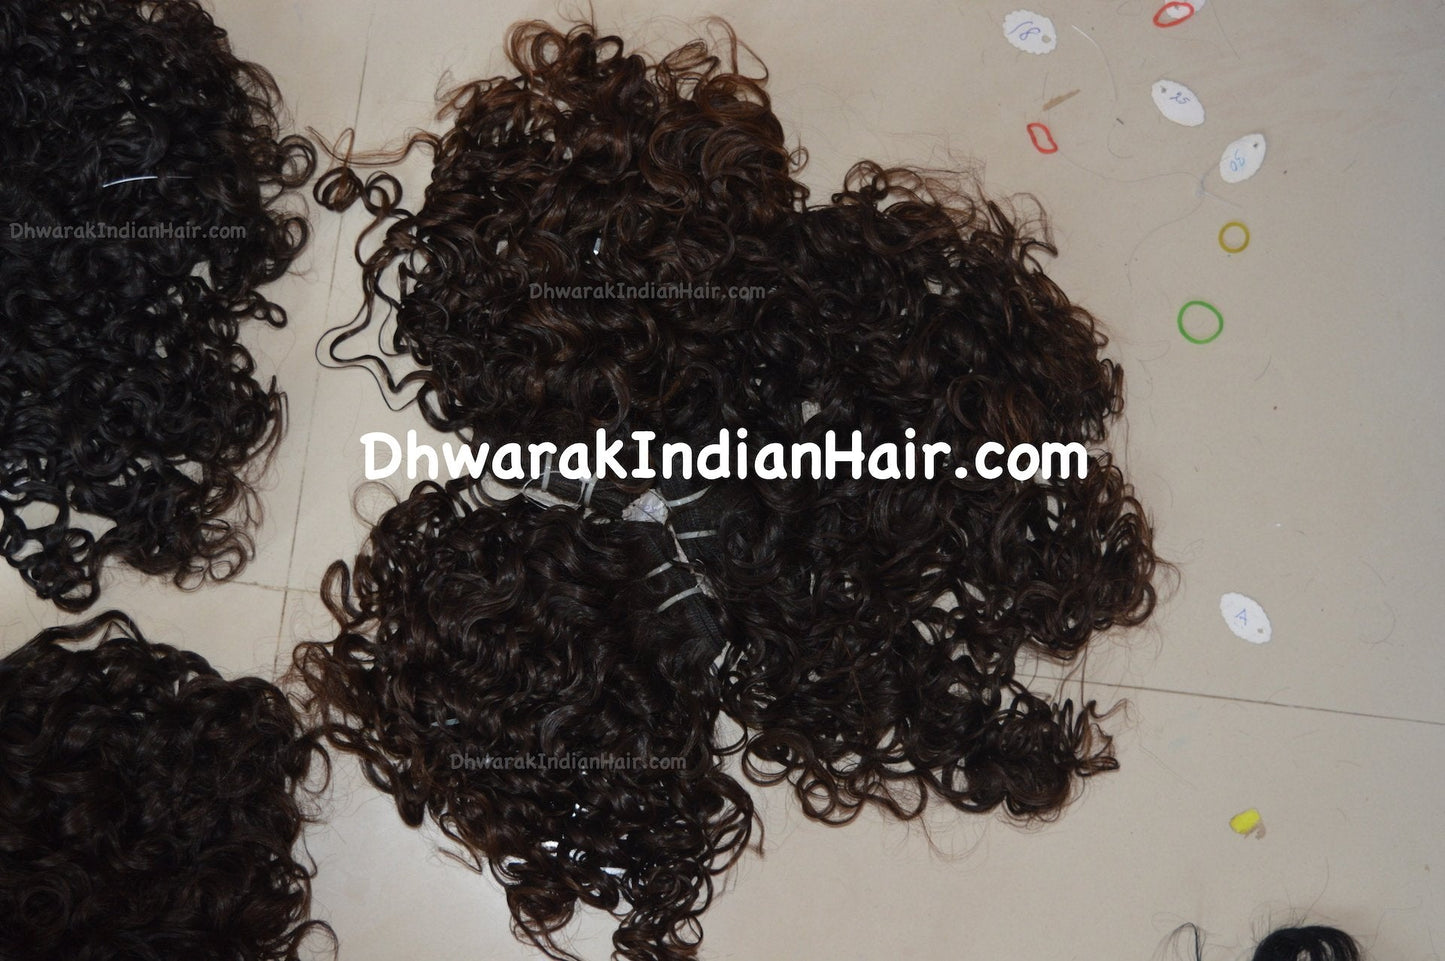  Temple Hair Exporters Suppliers in India  Wigs Hair vendor list Indian hair vendor